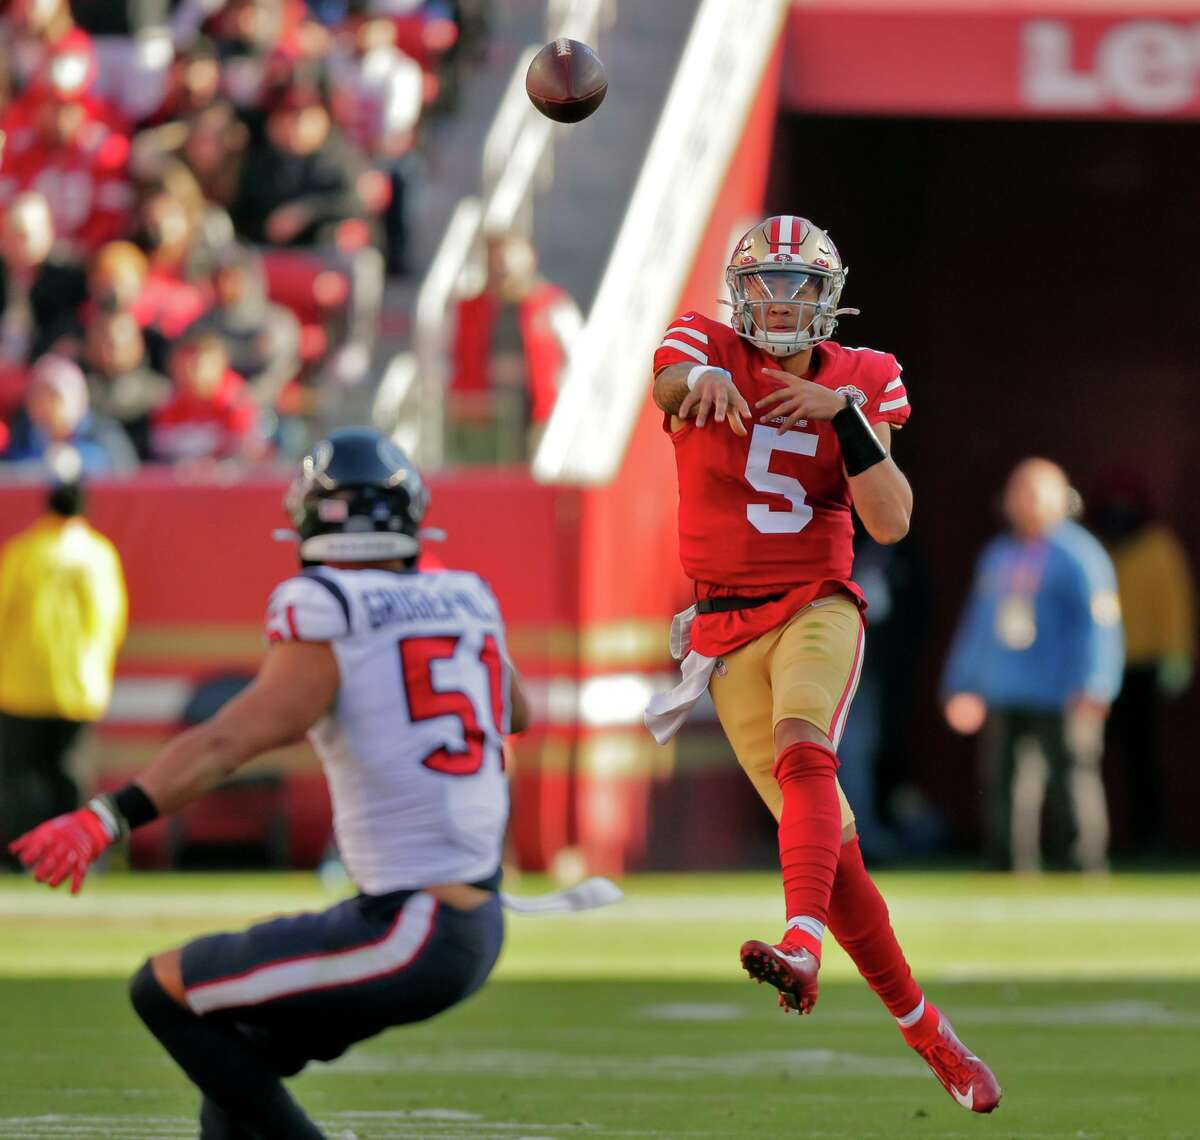 Trey Lance (5) throws in the first half as the San Francisco 49ers played the Houston Texans at Levi’s Stadium in Santa Clara, Calif., on Sunday, January 2, 2022.